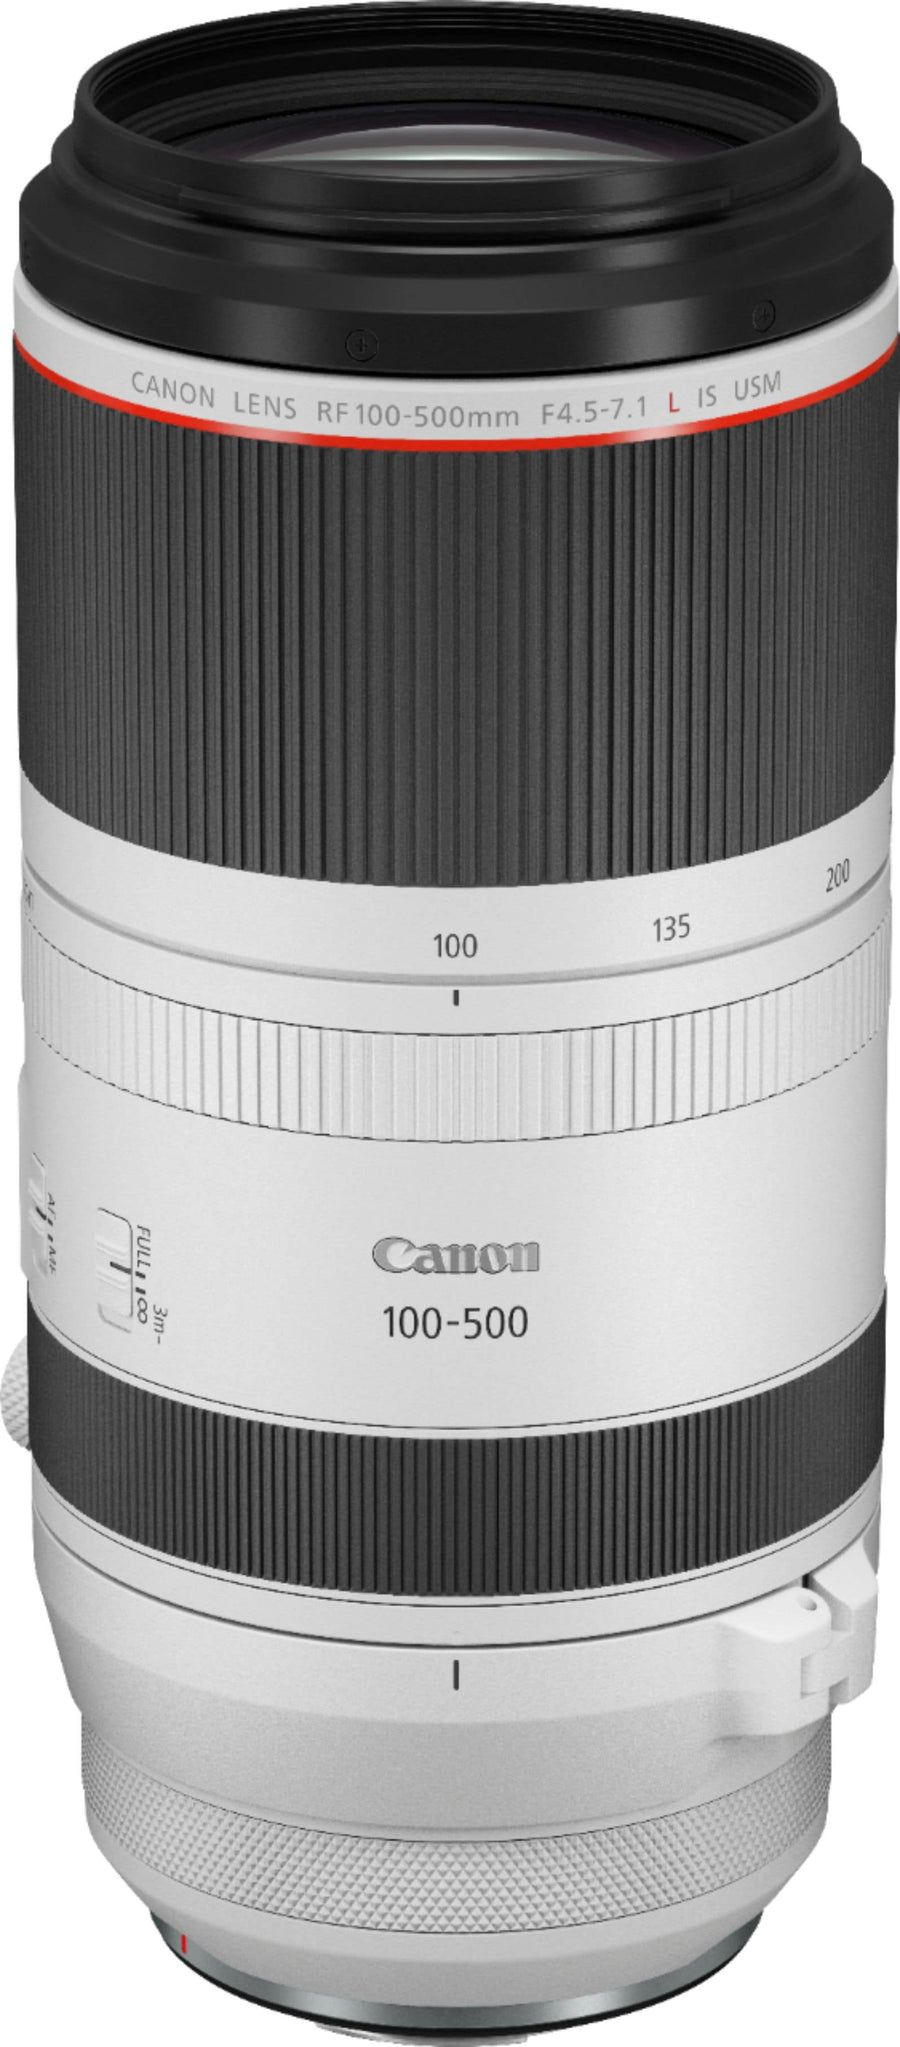 Canon - RF 100-500mm f/4.5-7.1 L IS USM Telephoto Zoom Lens - White_0